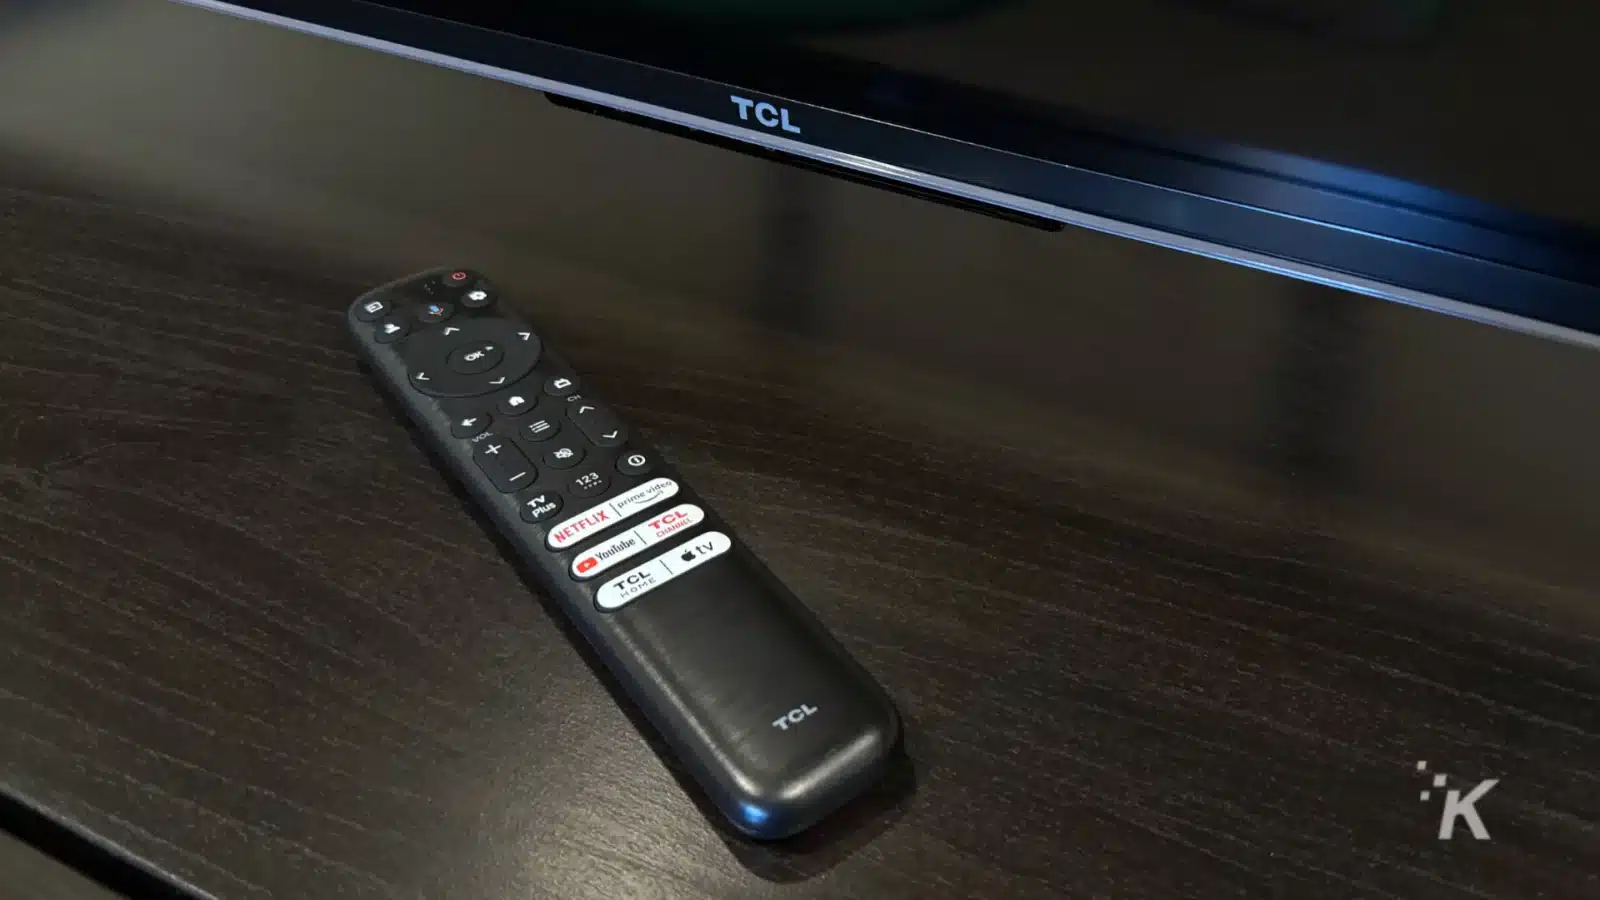 A tcl remote control sits on a table.